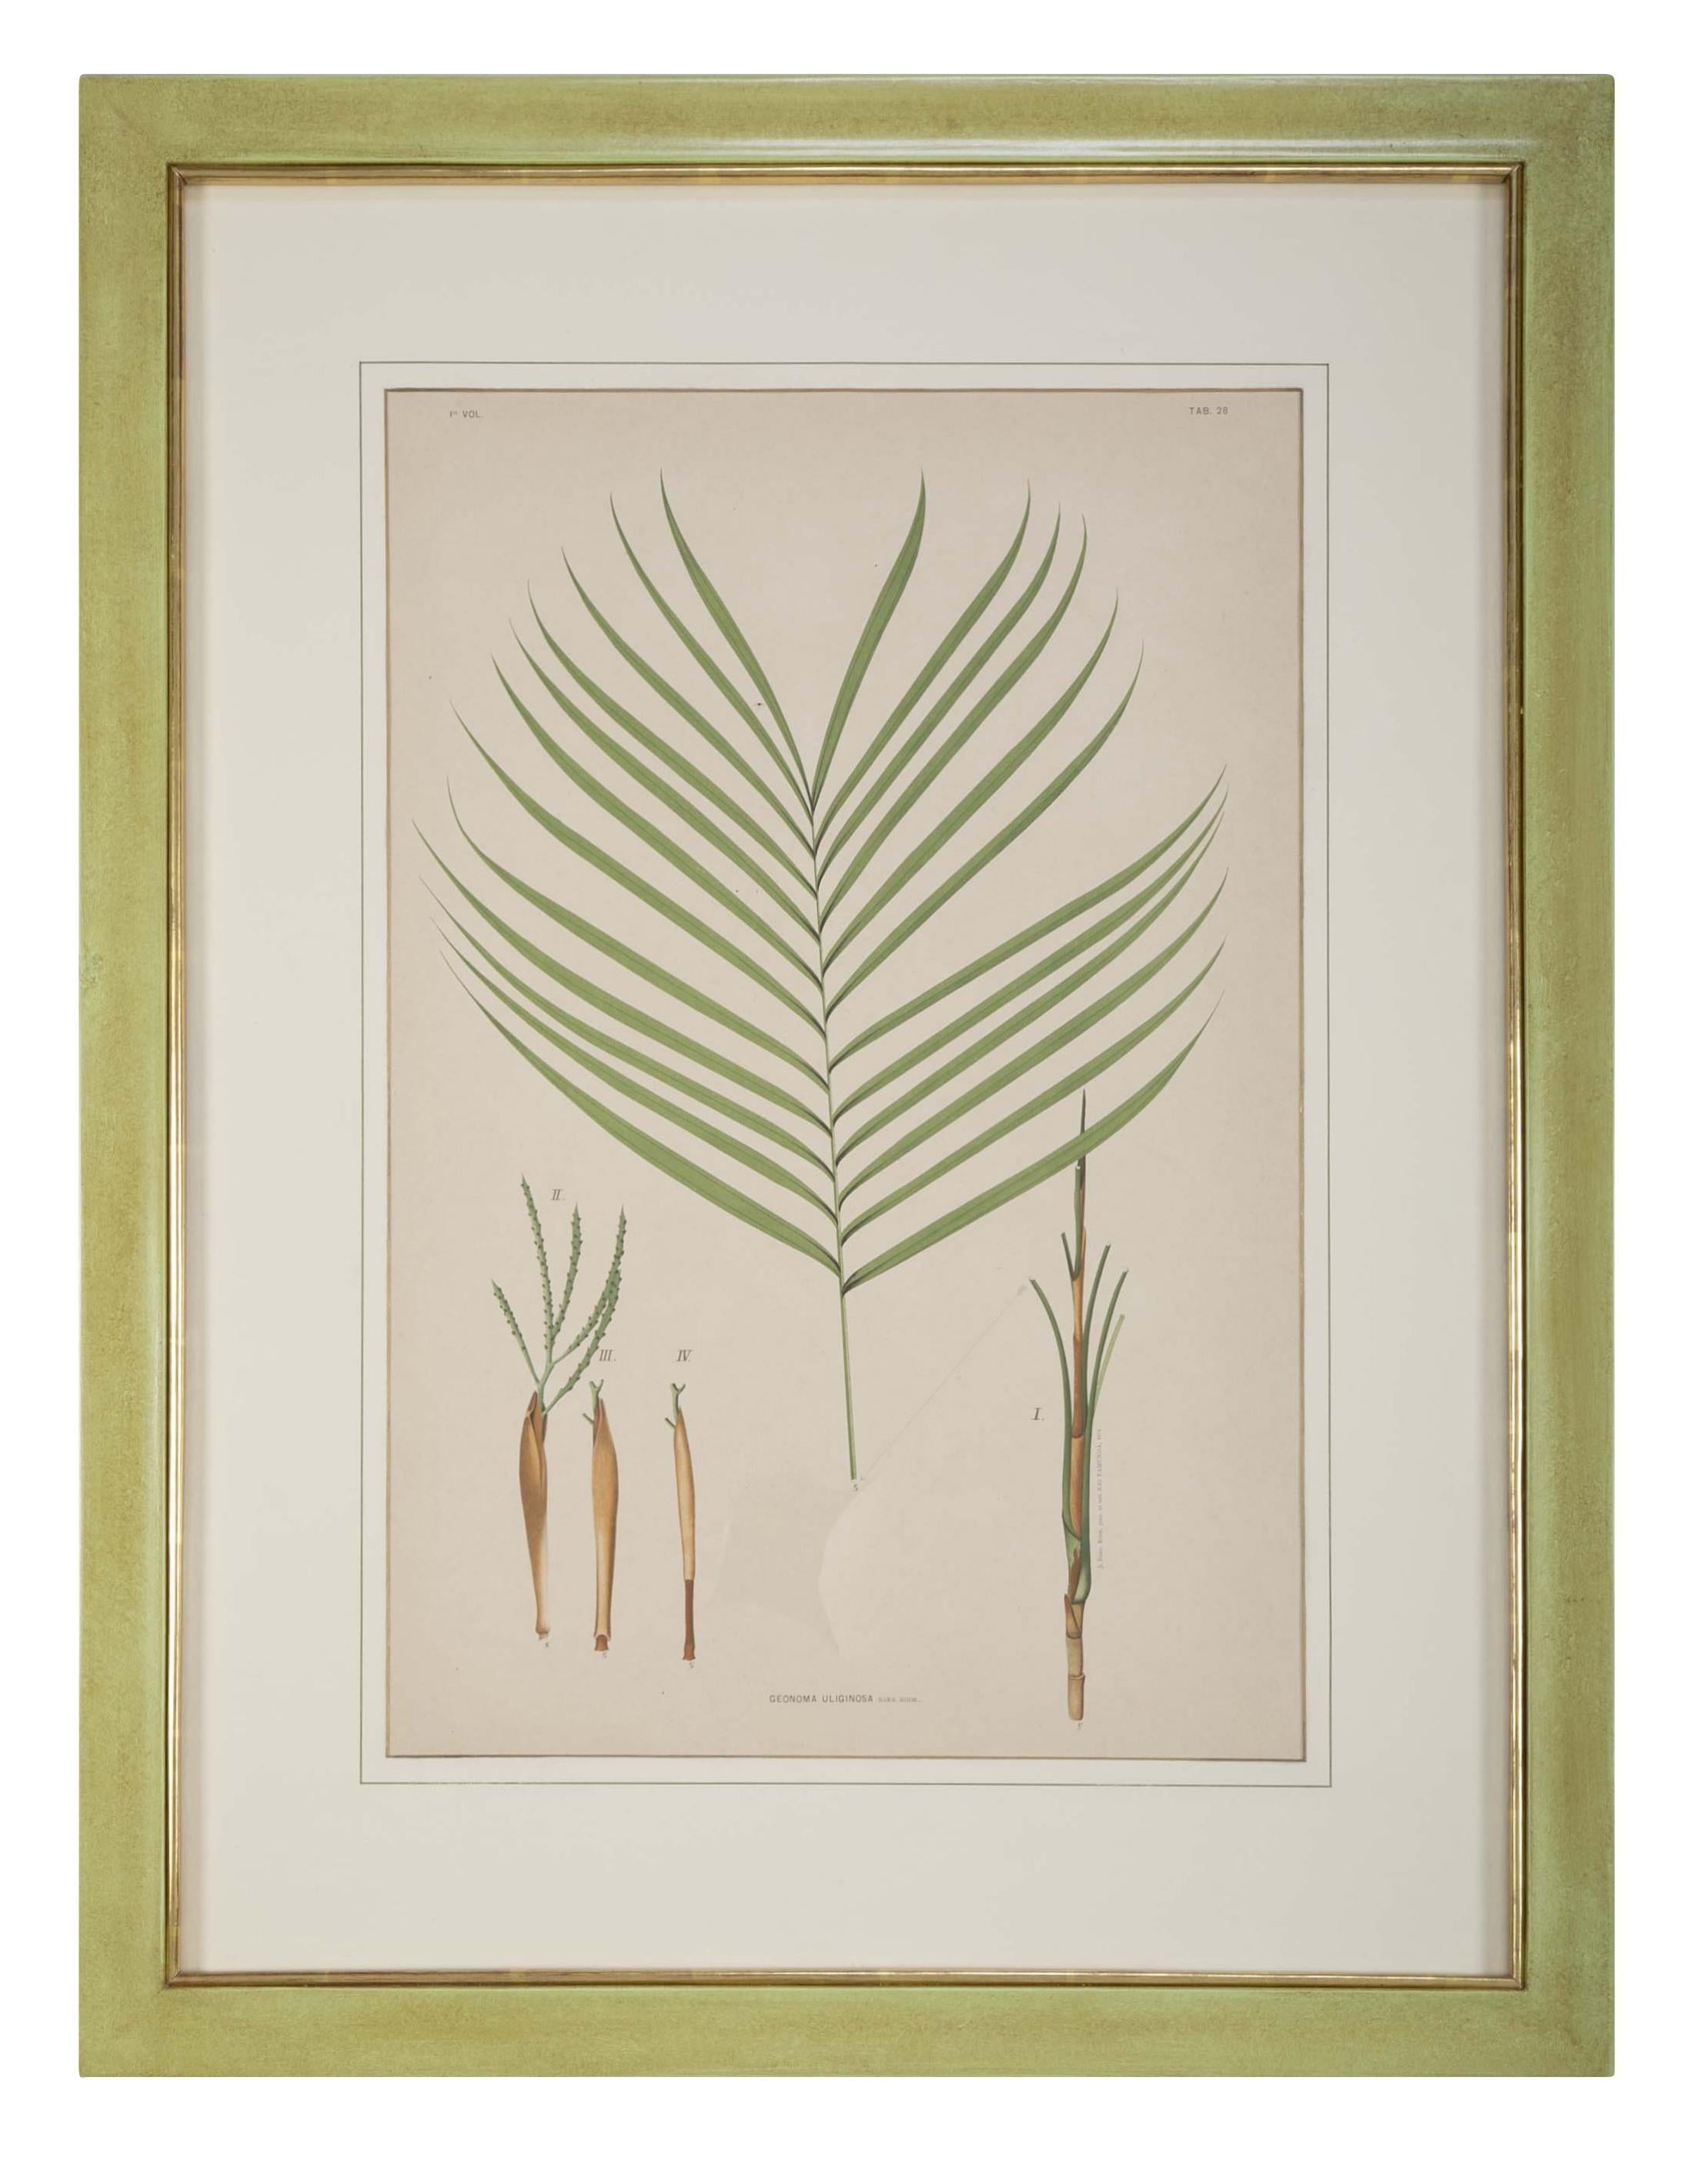 A set of four chromolithographs of Brazilian palm culture by Joao Barbosa Rodrigues custom framed in archival materials. 
Handmade unique frames with gold fillet.
Can be sold separately for $ 2,500 each.